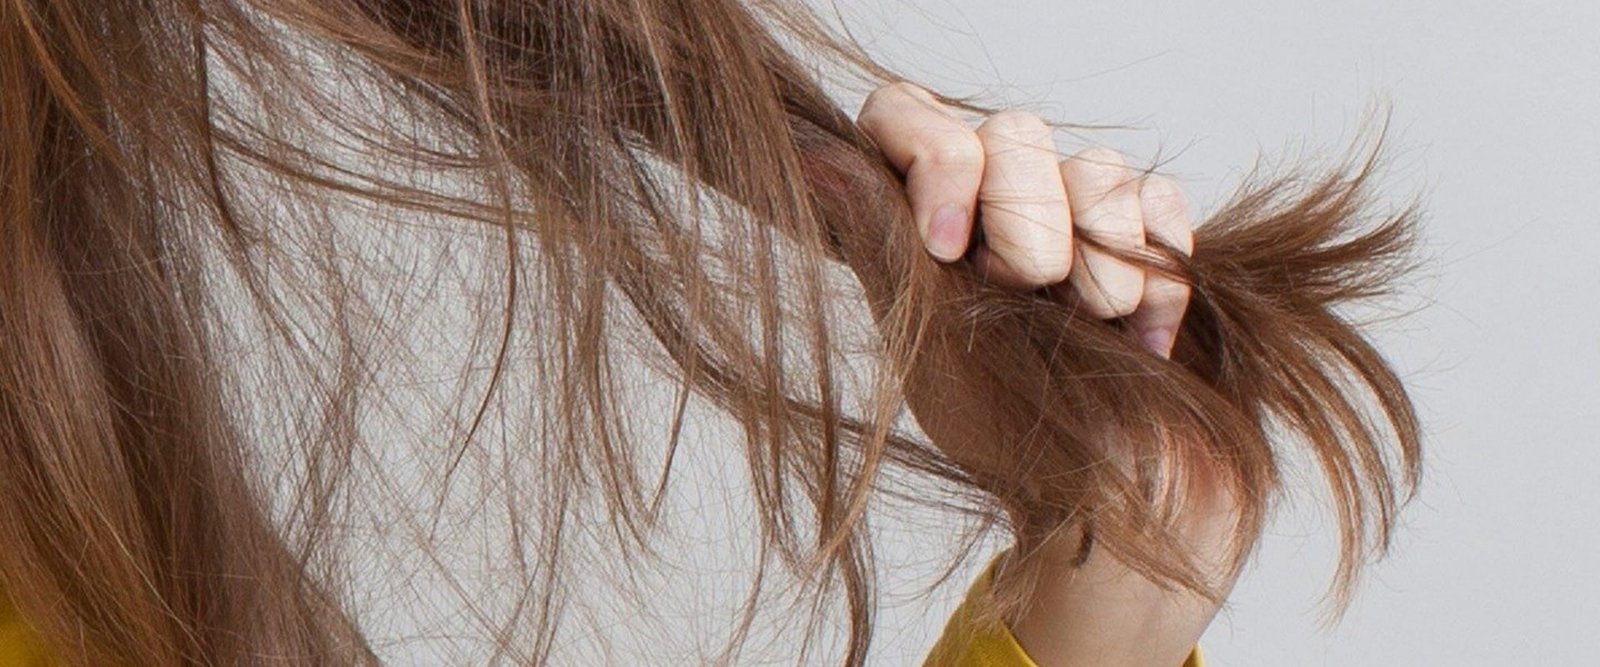 Is hair loss due to poor diet permanent?